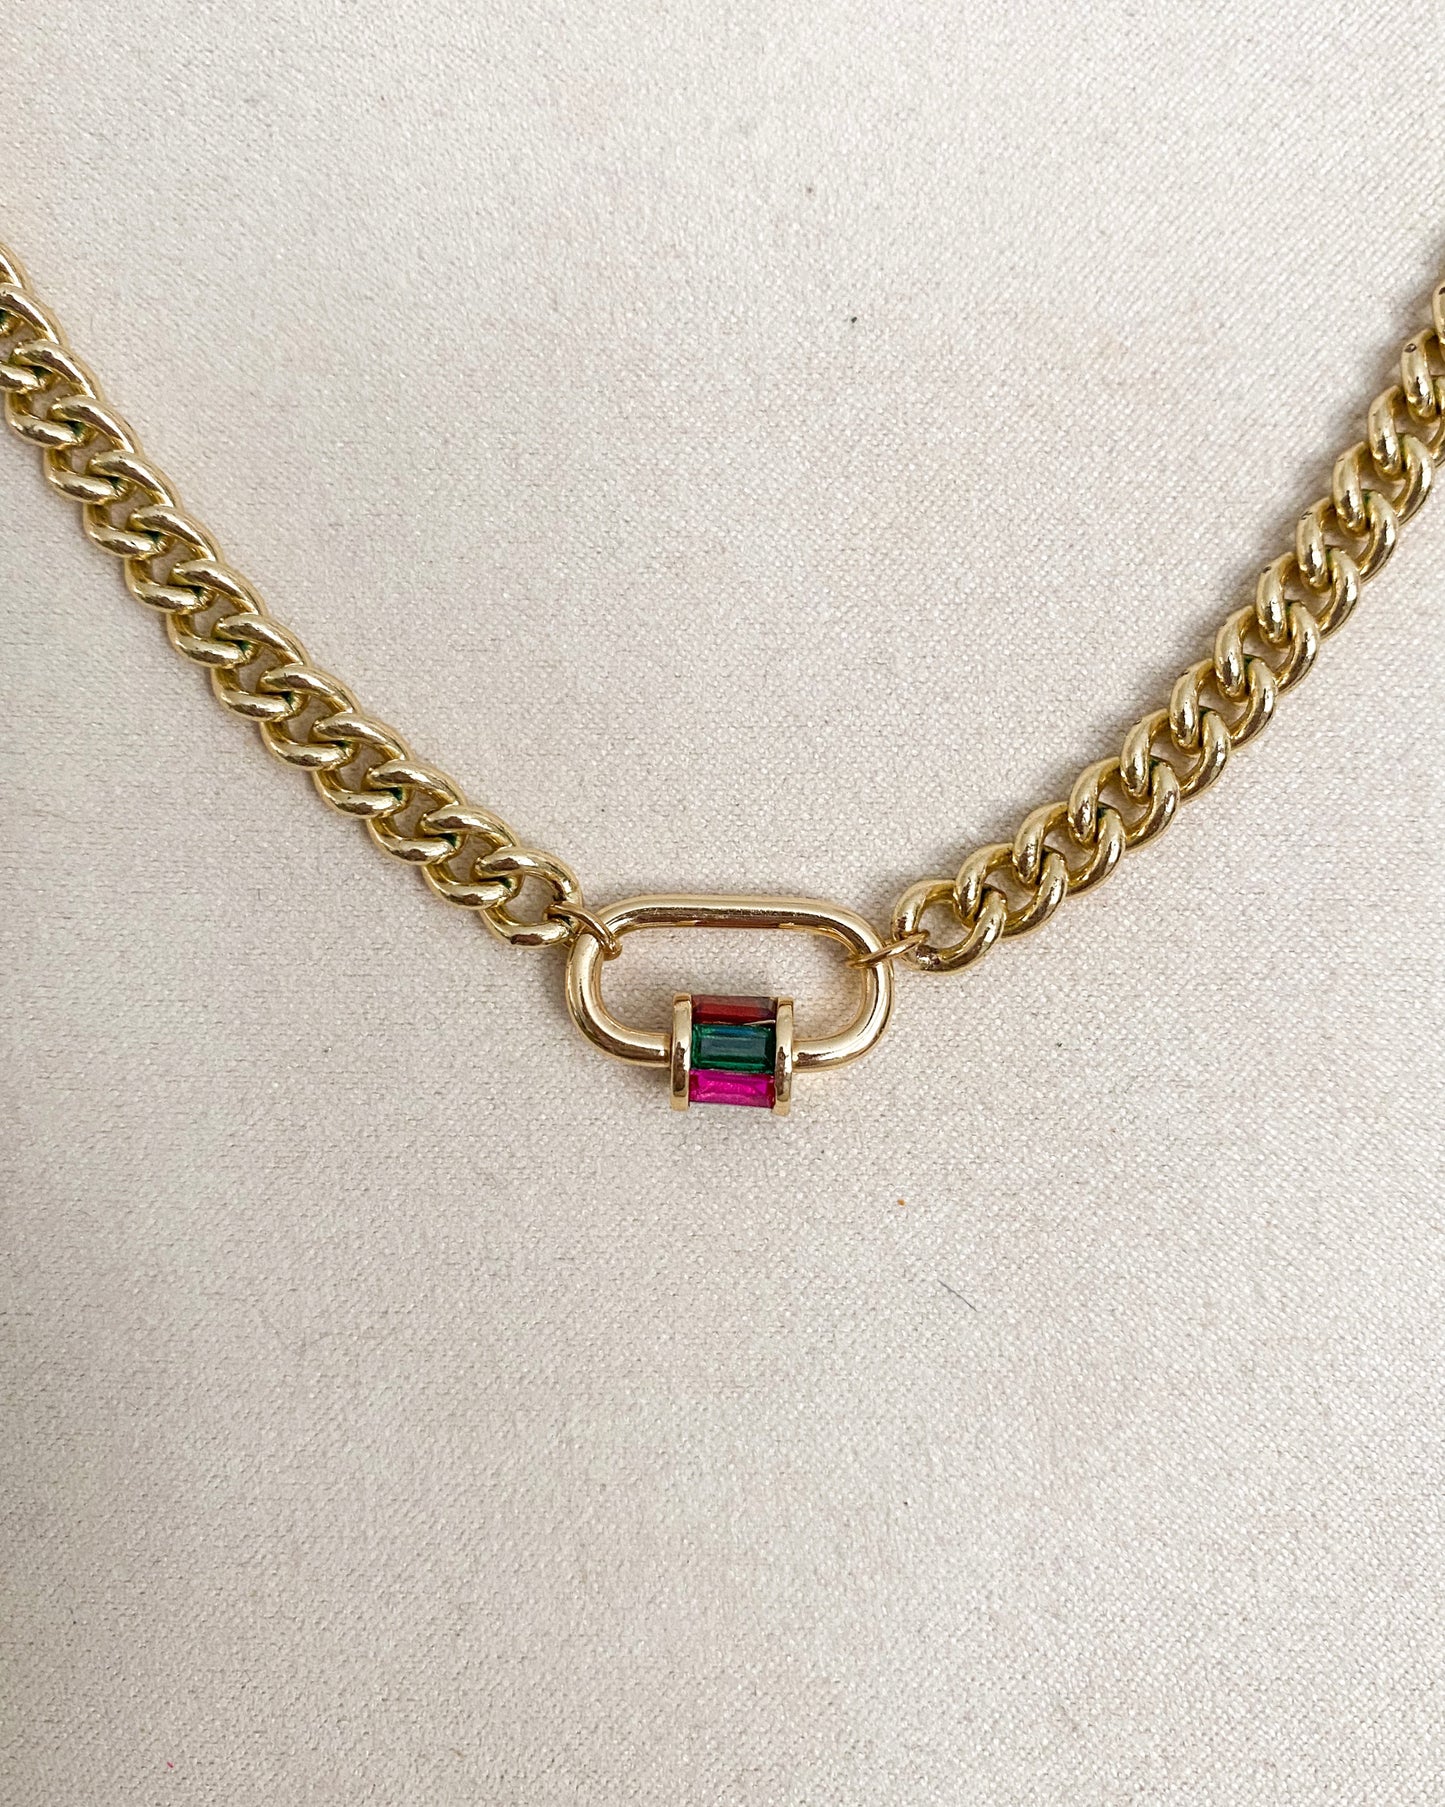 Gia Necklace (24k Gold Filled)